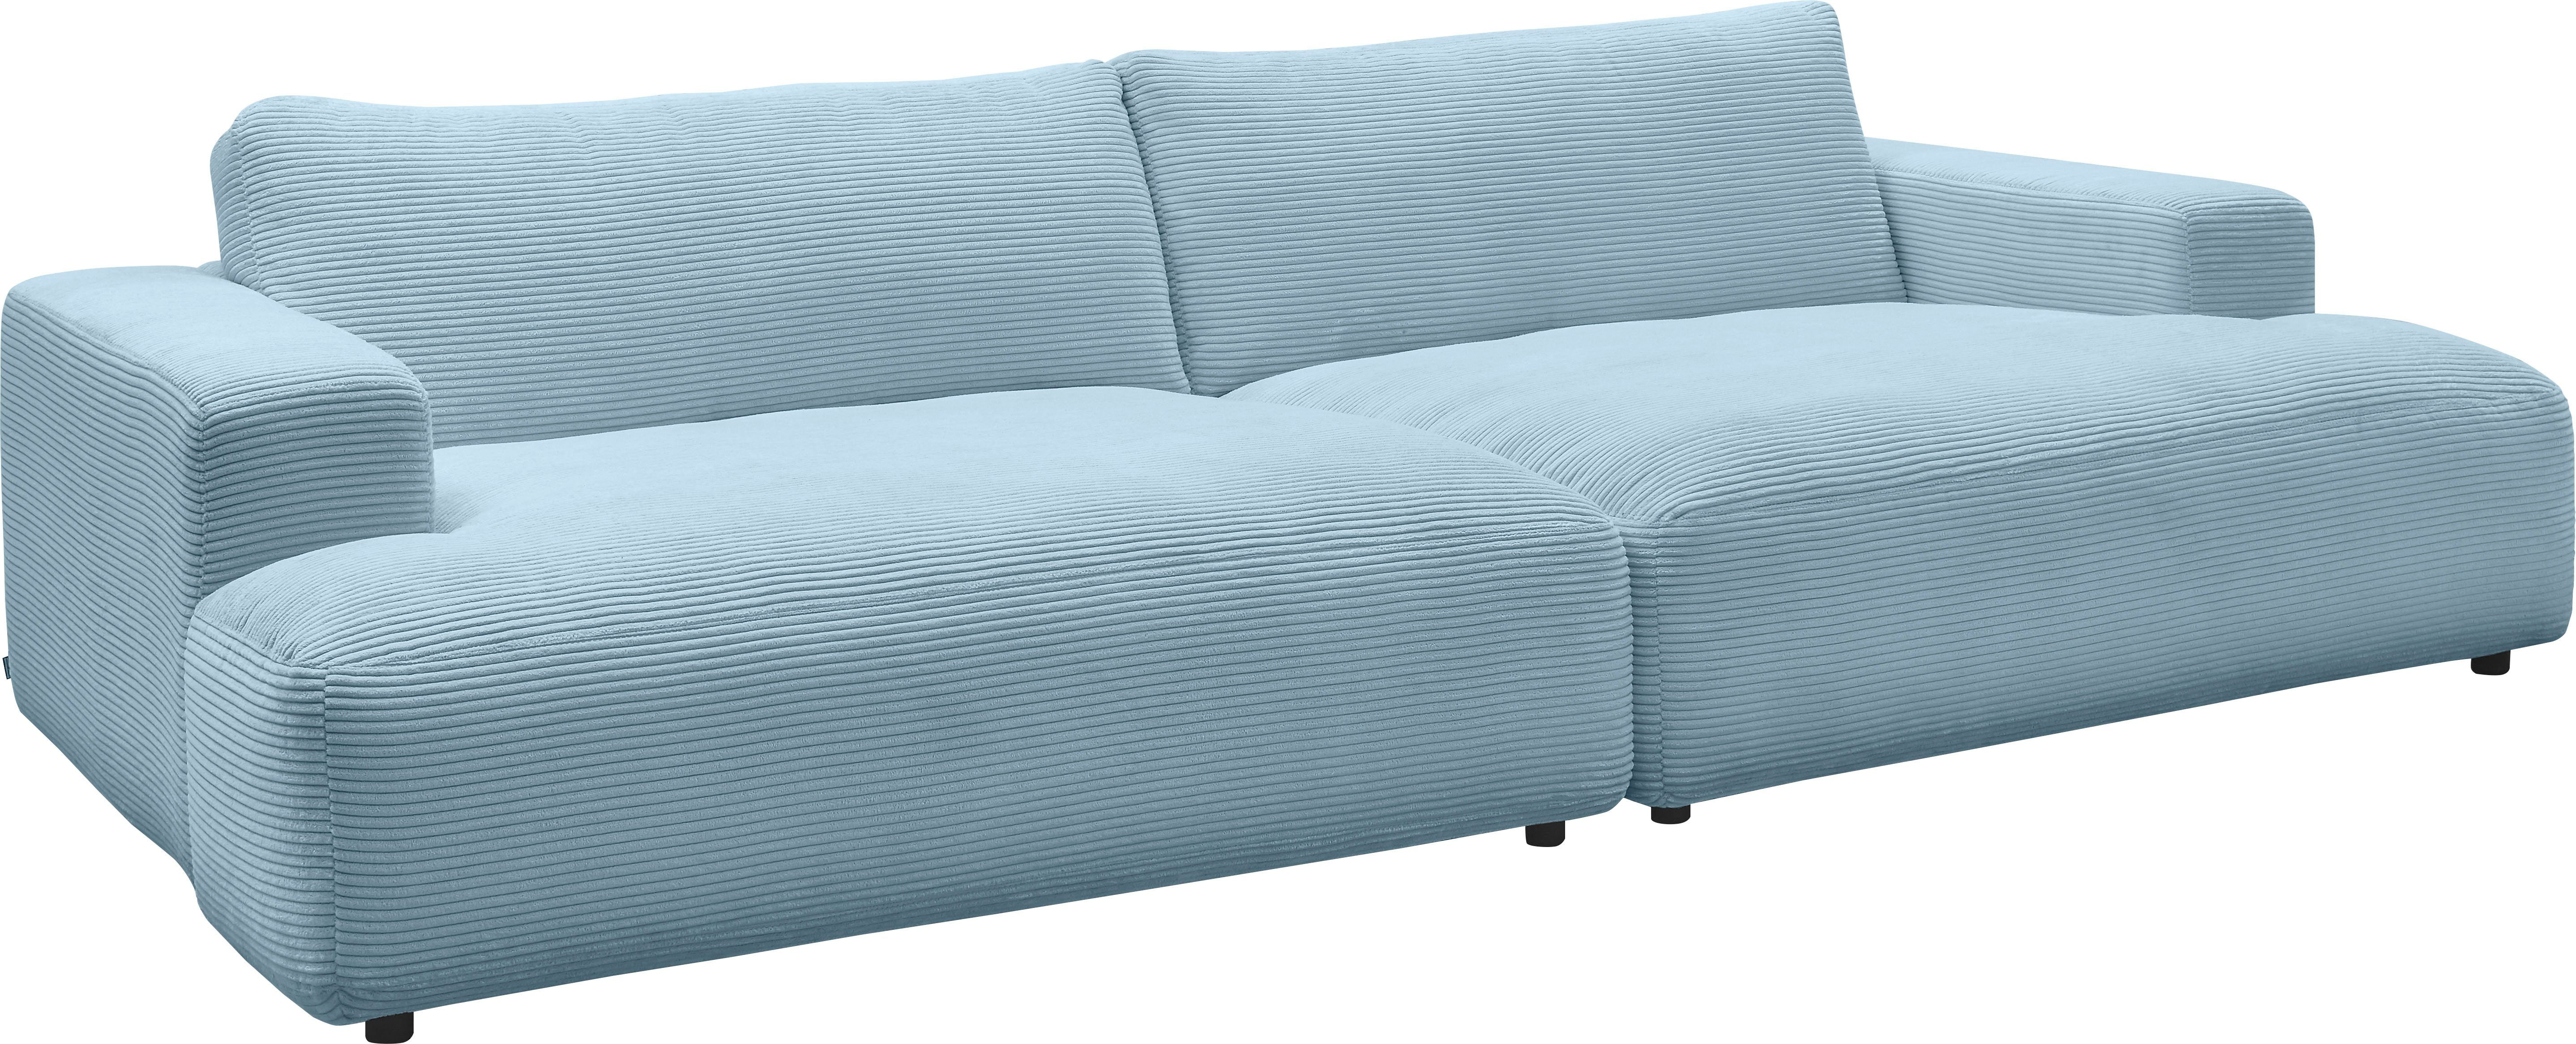 Cord-Bezug, by Breite Loungesofa cm light-blue Musterring 292 GALLERY M Lucia, branded